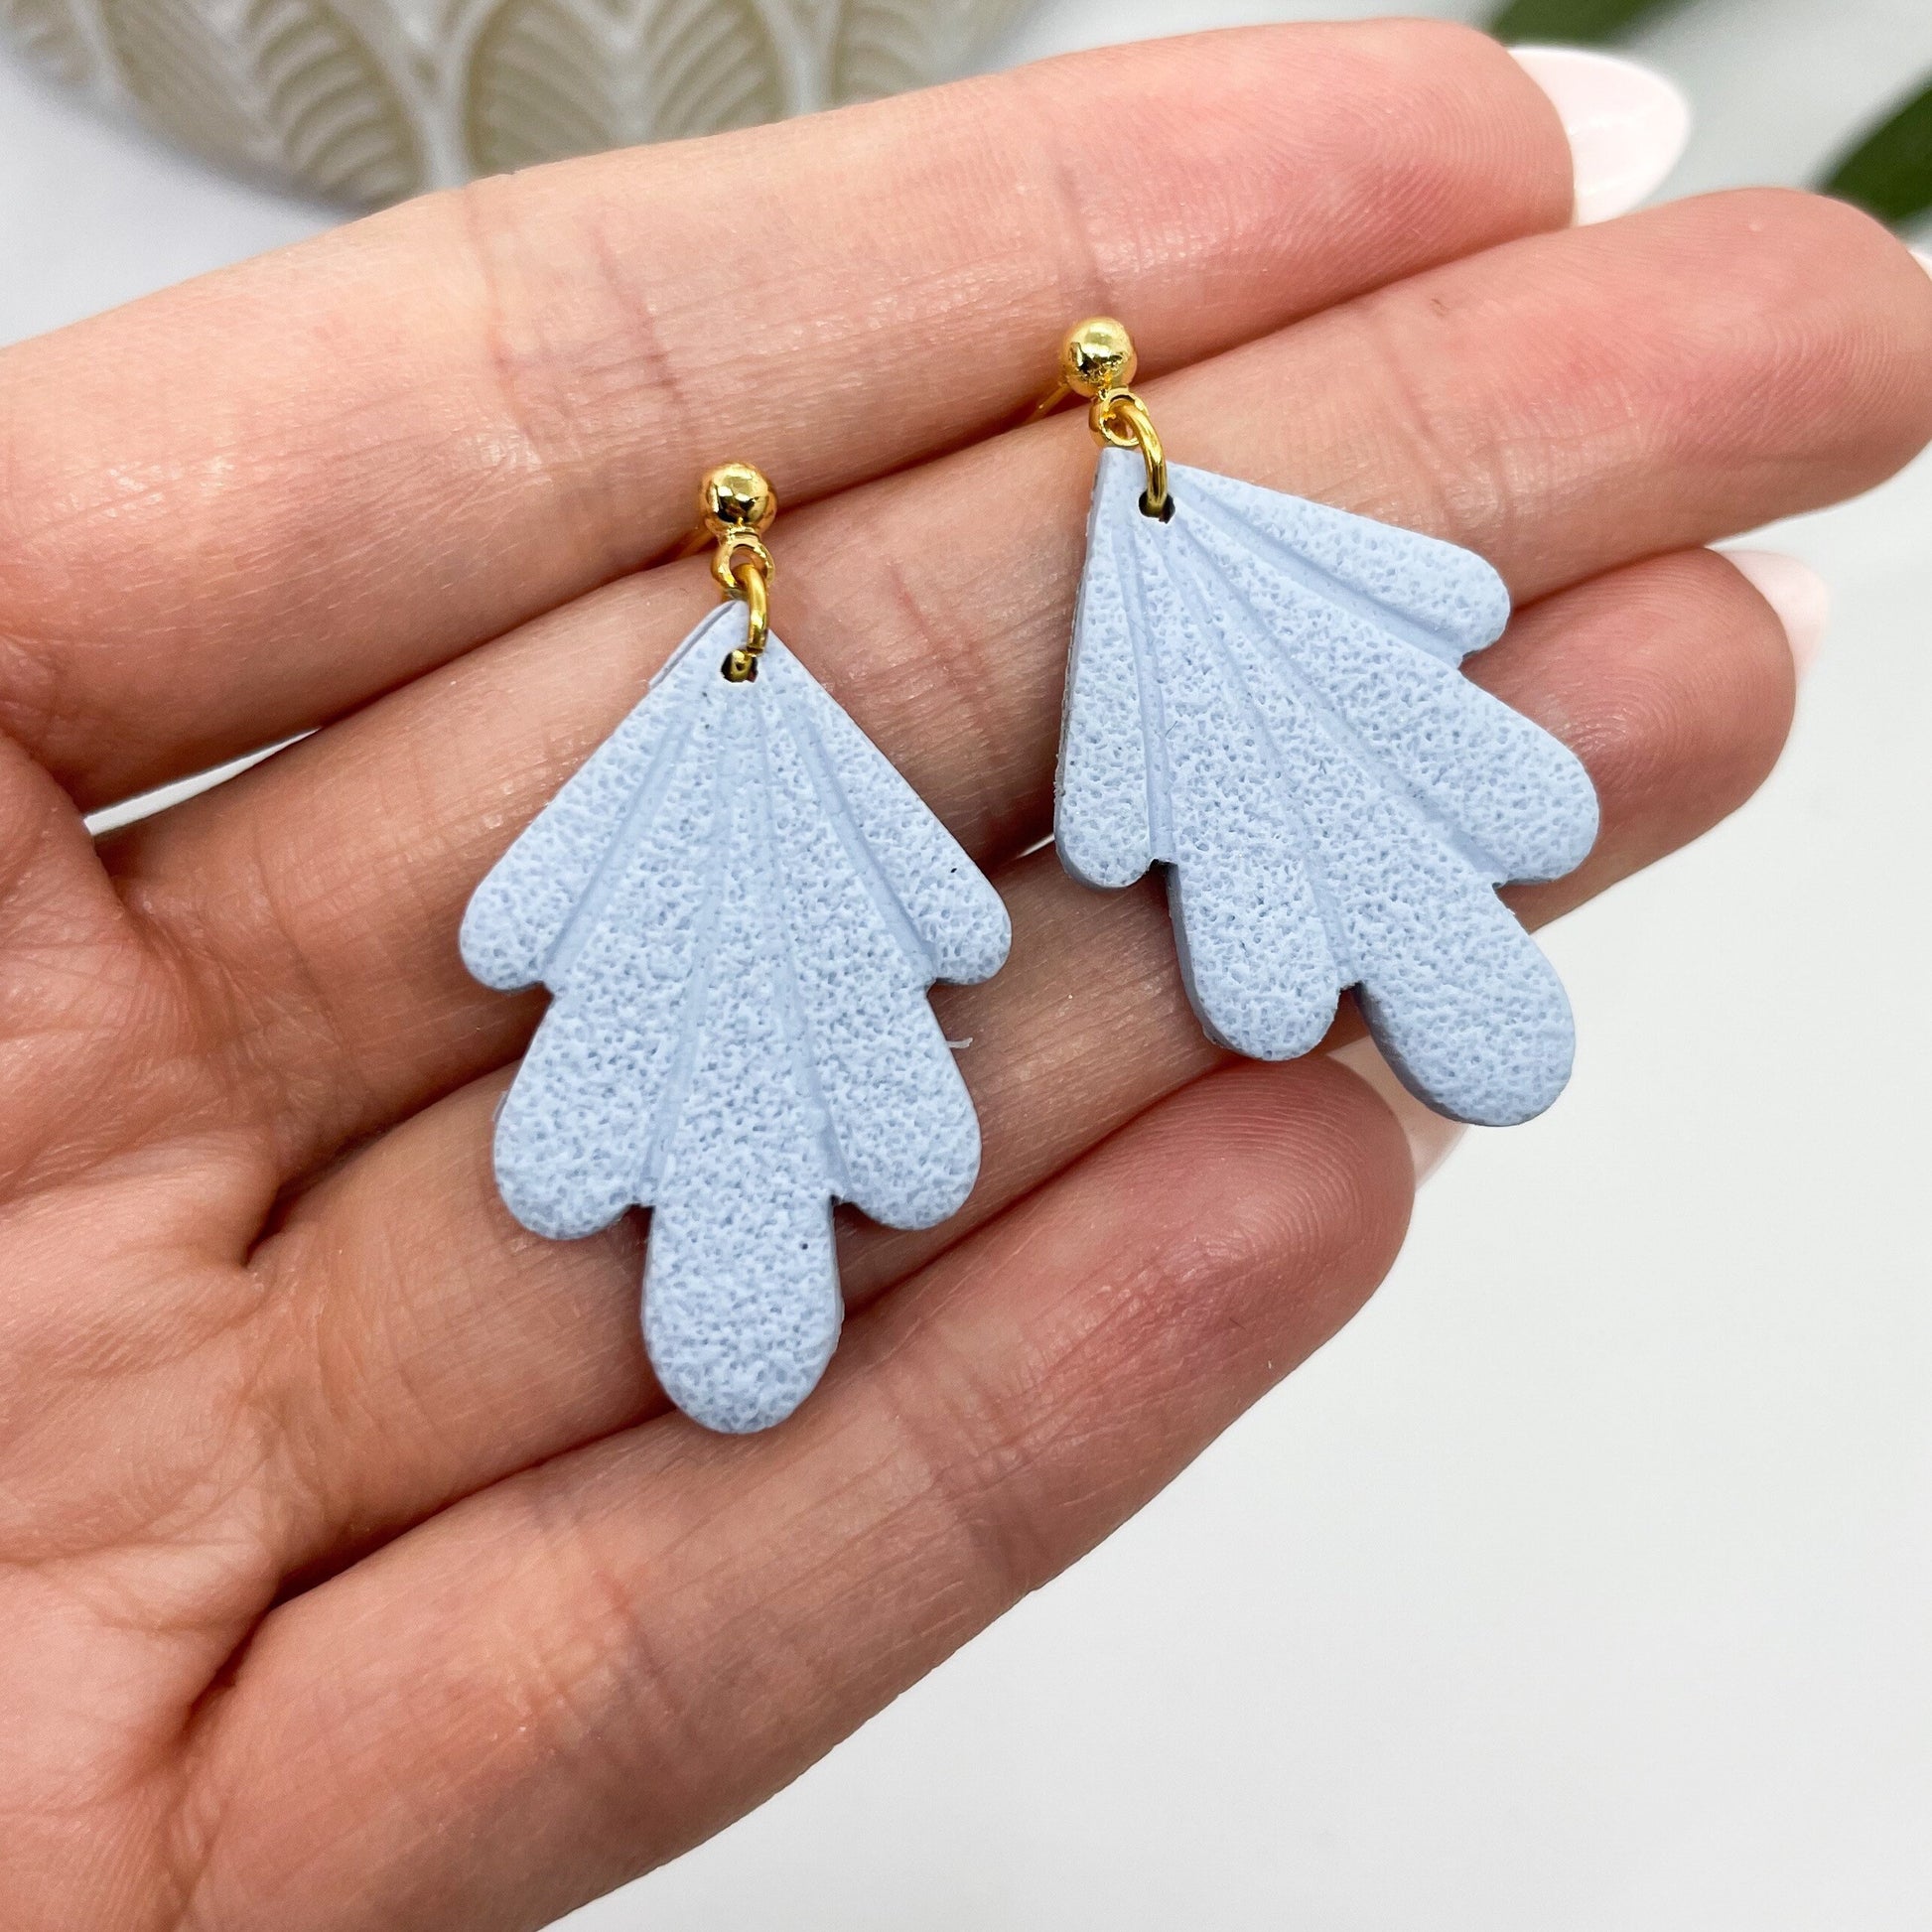 Textured blue Polymer clay earrings, post box gift, best friend gift, girlfriend gift, sister gift